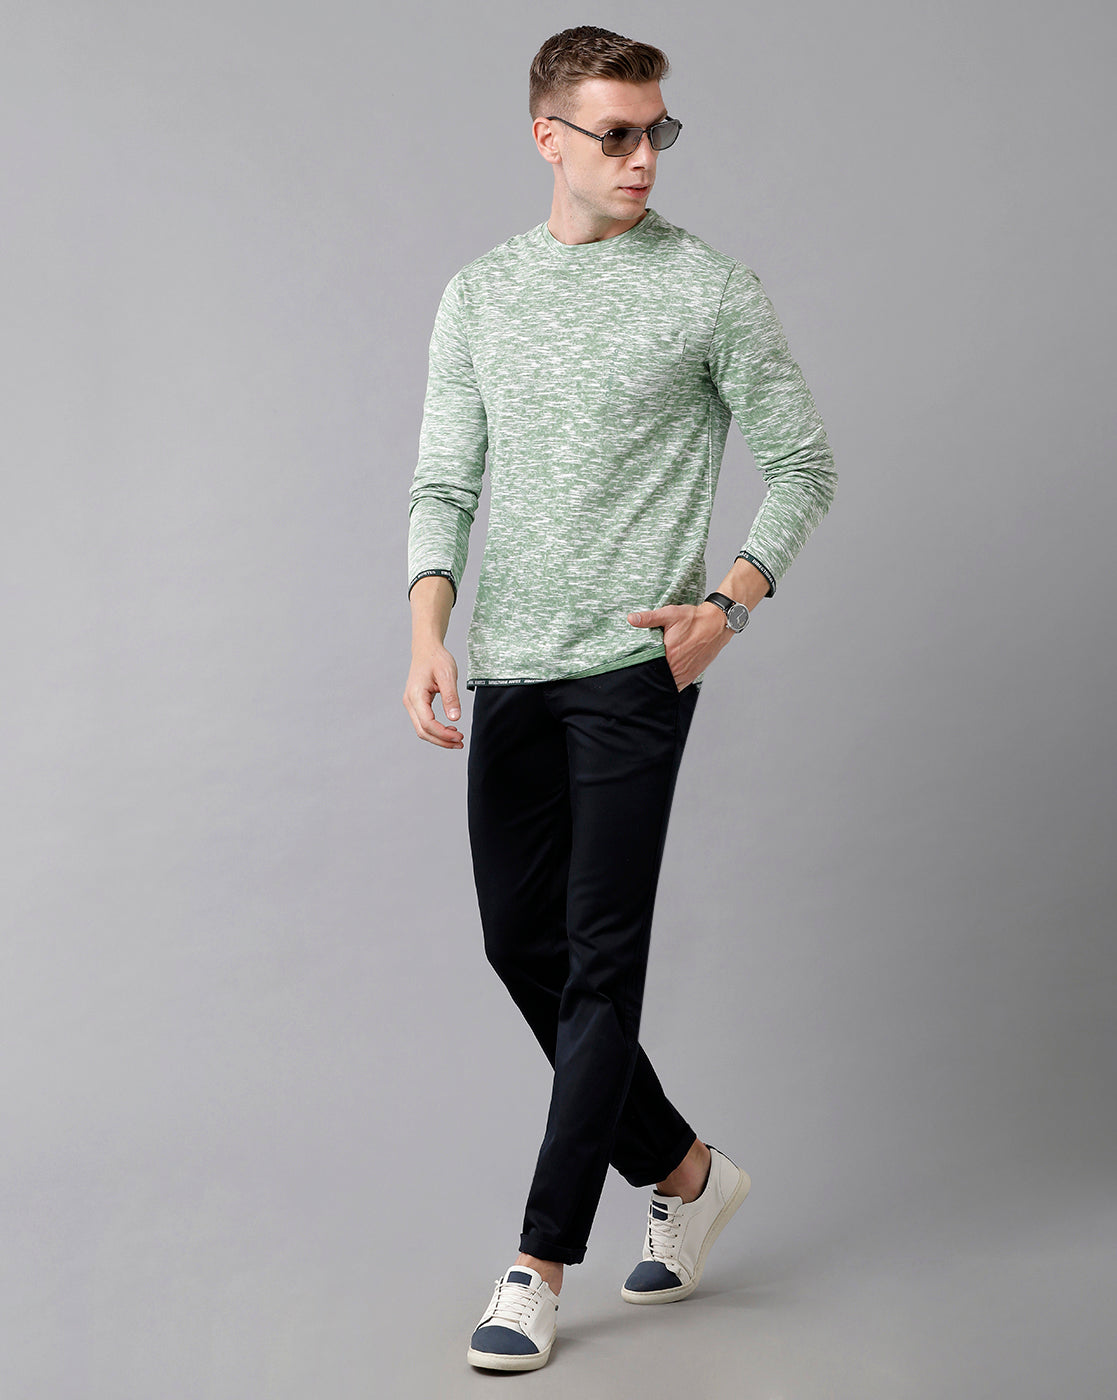 Classic Polo Men's Cotton Self Design Full Sleeve Slim Fit Round Neck Green Color T-Shirt | Baleno Fs - 481 A